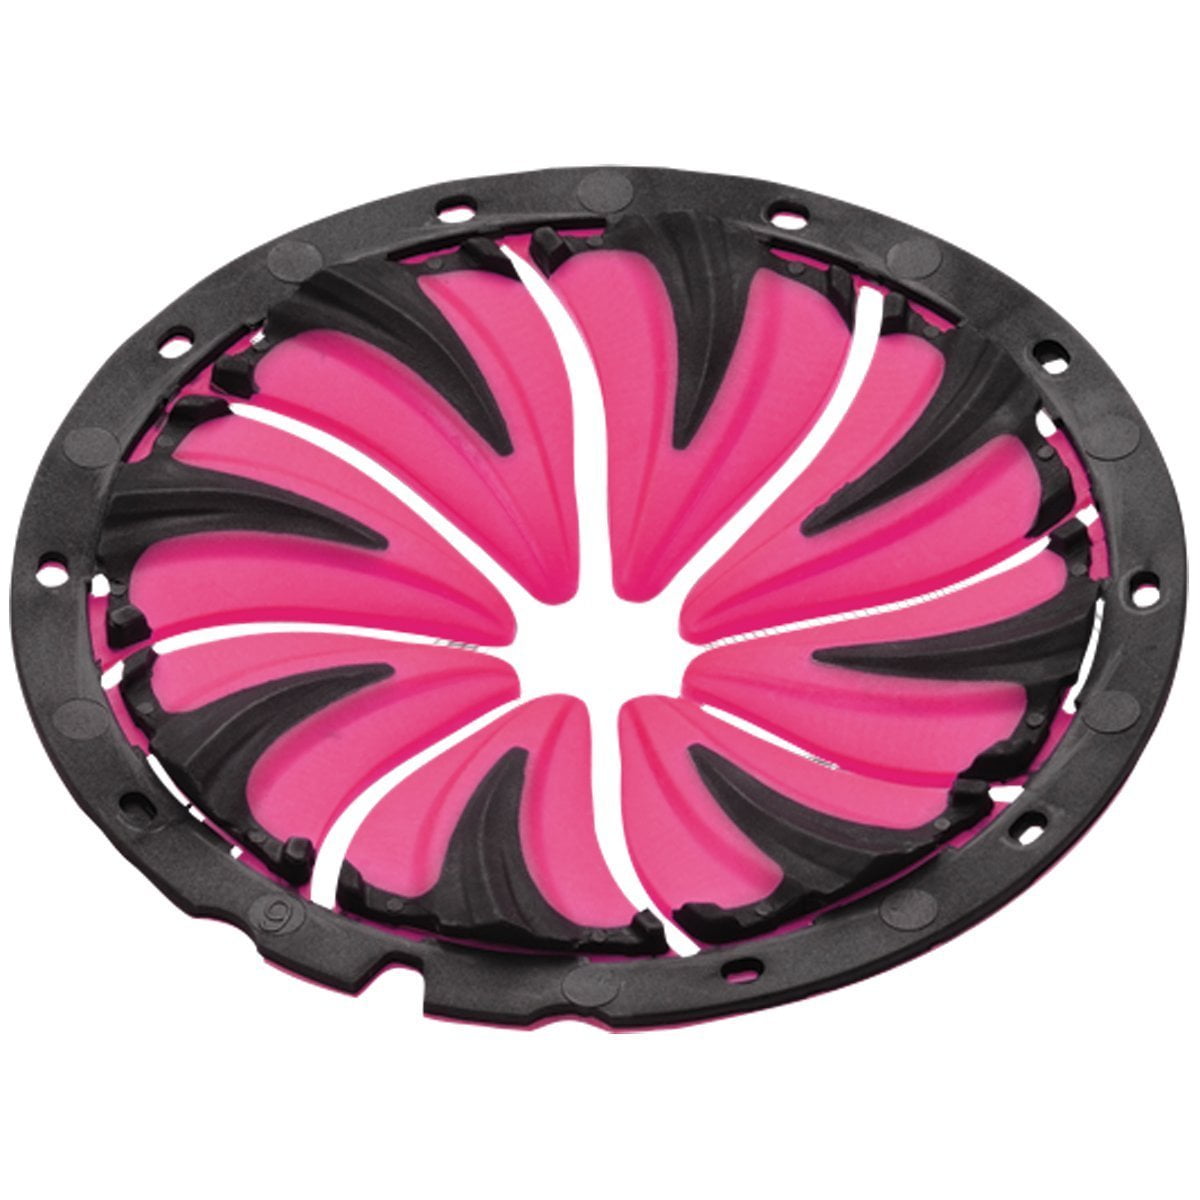 Dye Paintball Rotor Loader Hopper Quick Feed 6.0 Pink 5156 for sale online 